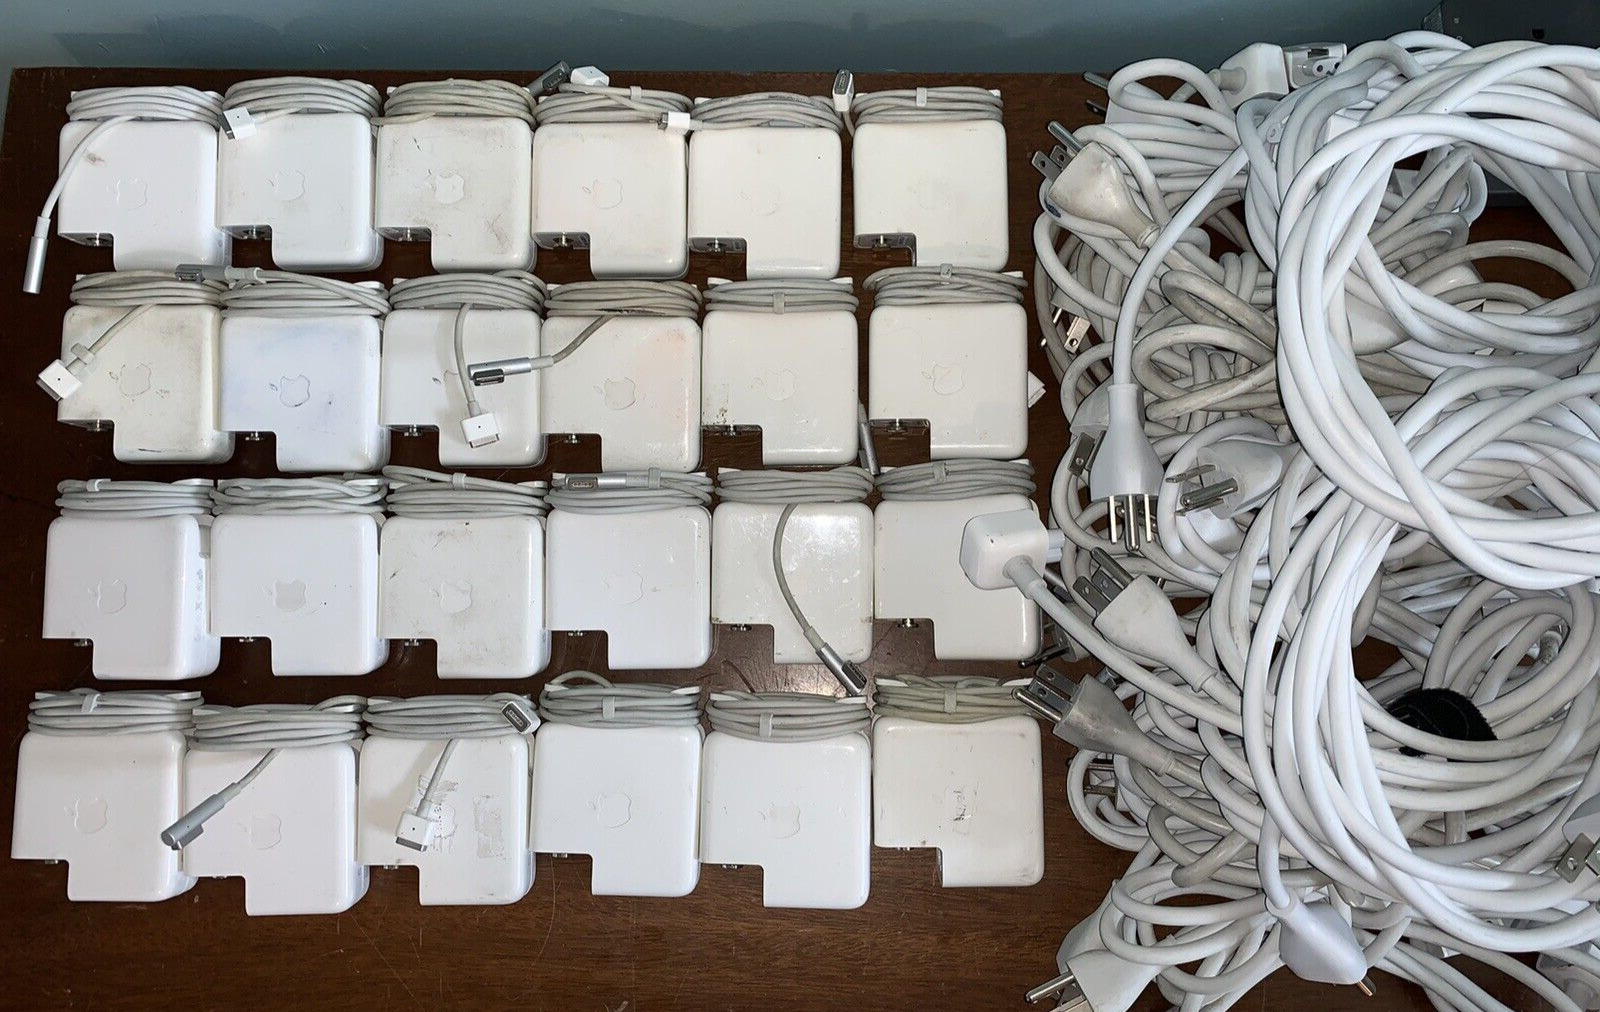 Lot:24 Apple A1344 60W MagSafe 1 Power Adapter Charger Old MacBook & MacBook Pro